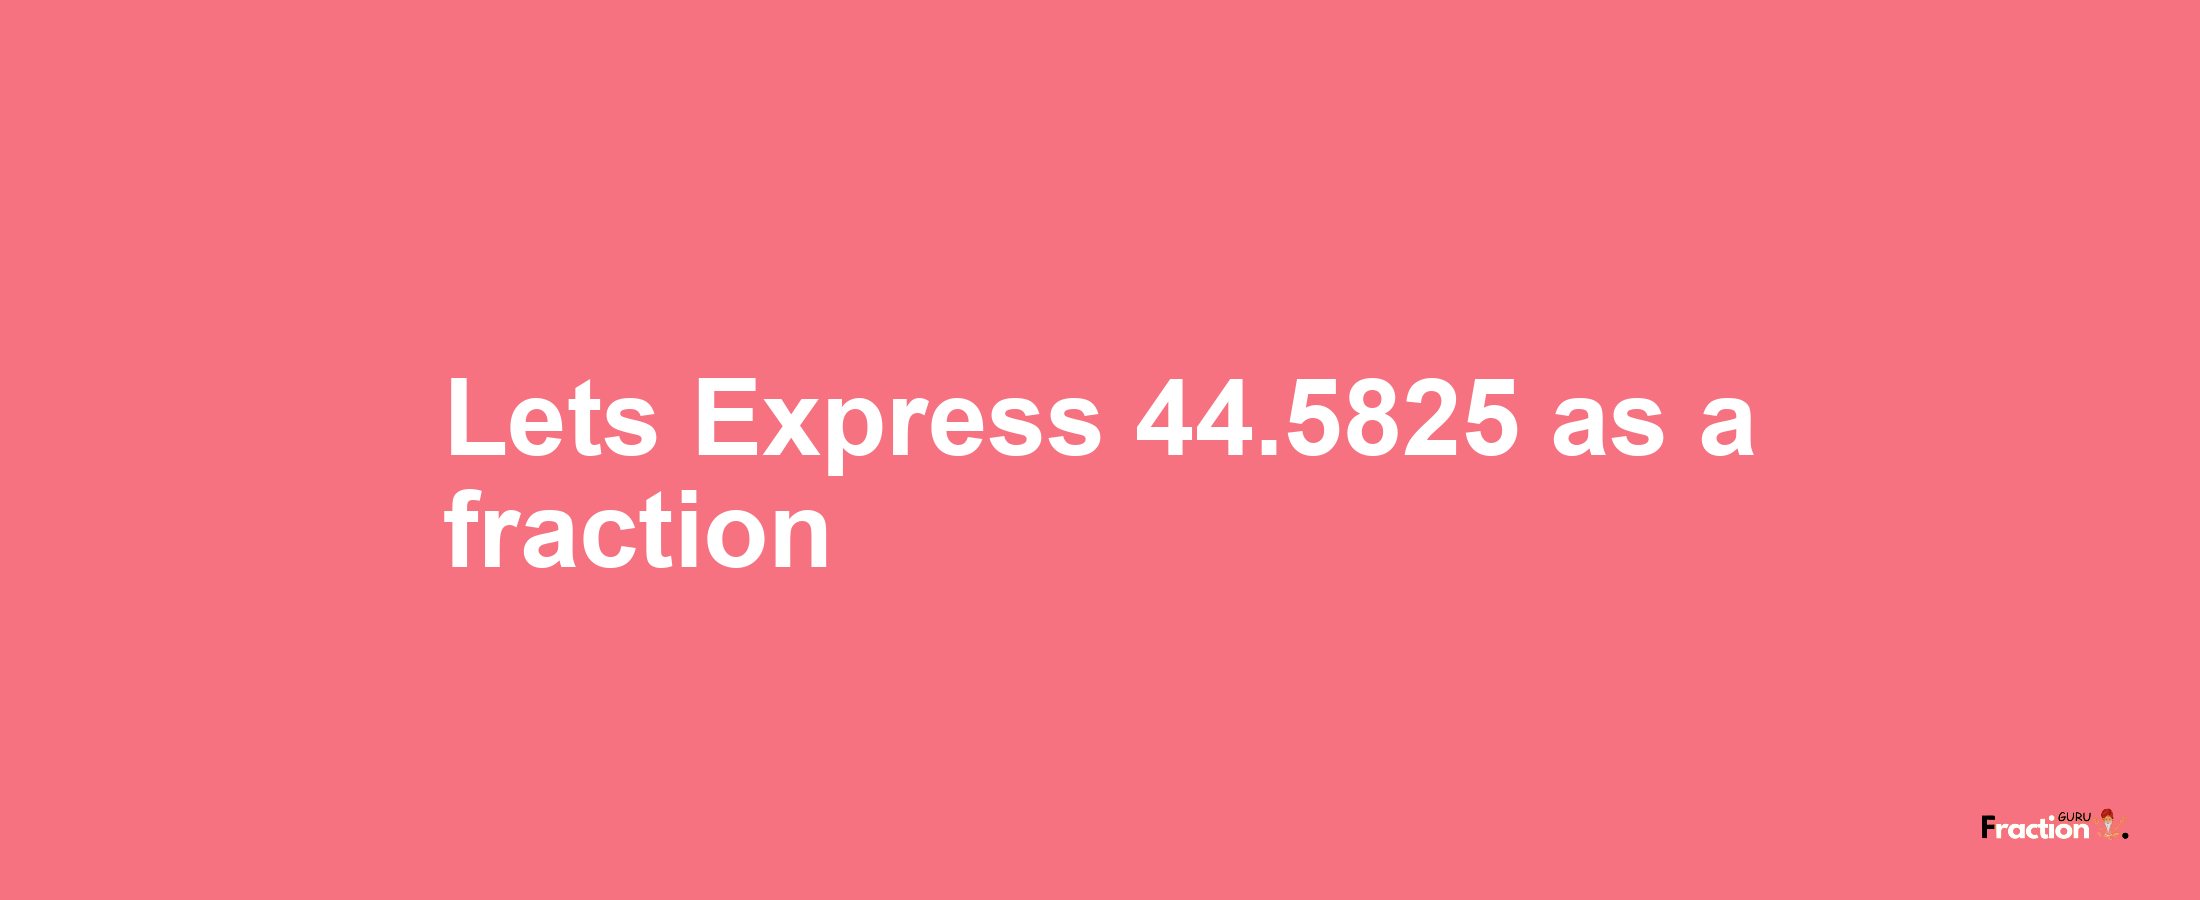 Lets Express 44.5825 as afraction